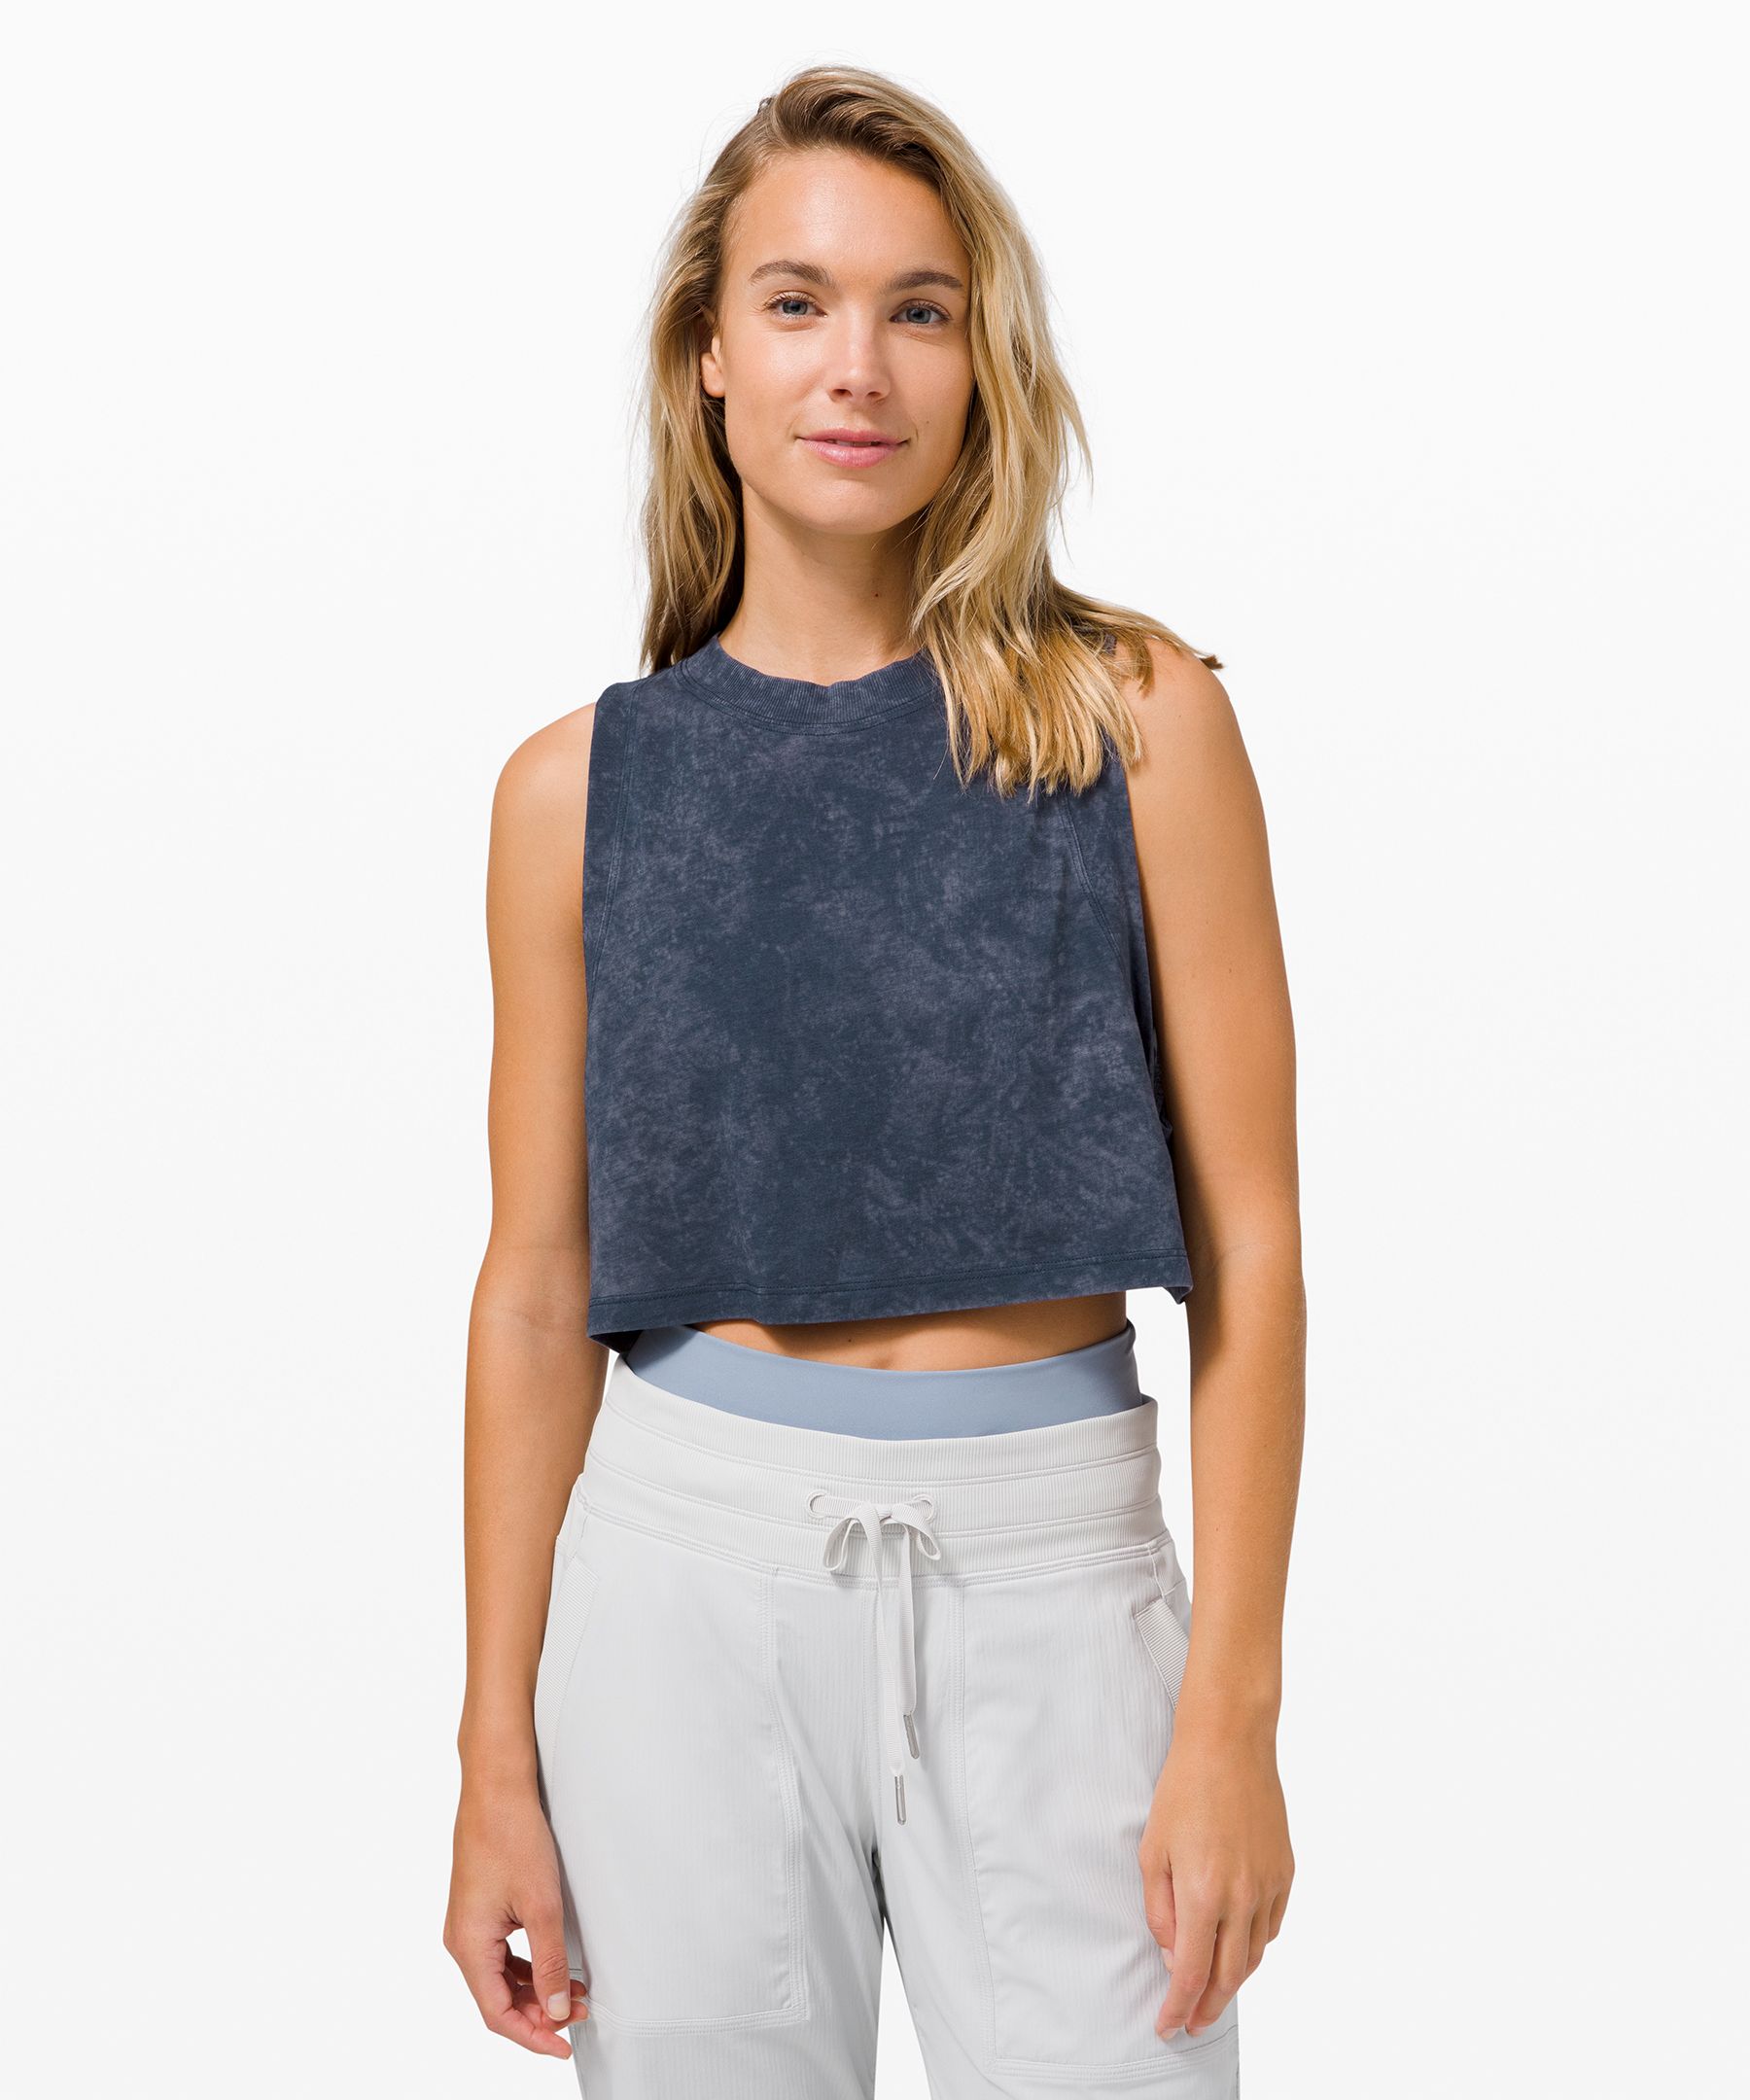 NWT Lululemon All Yours Crop Tank Top